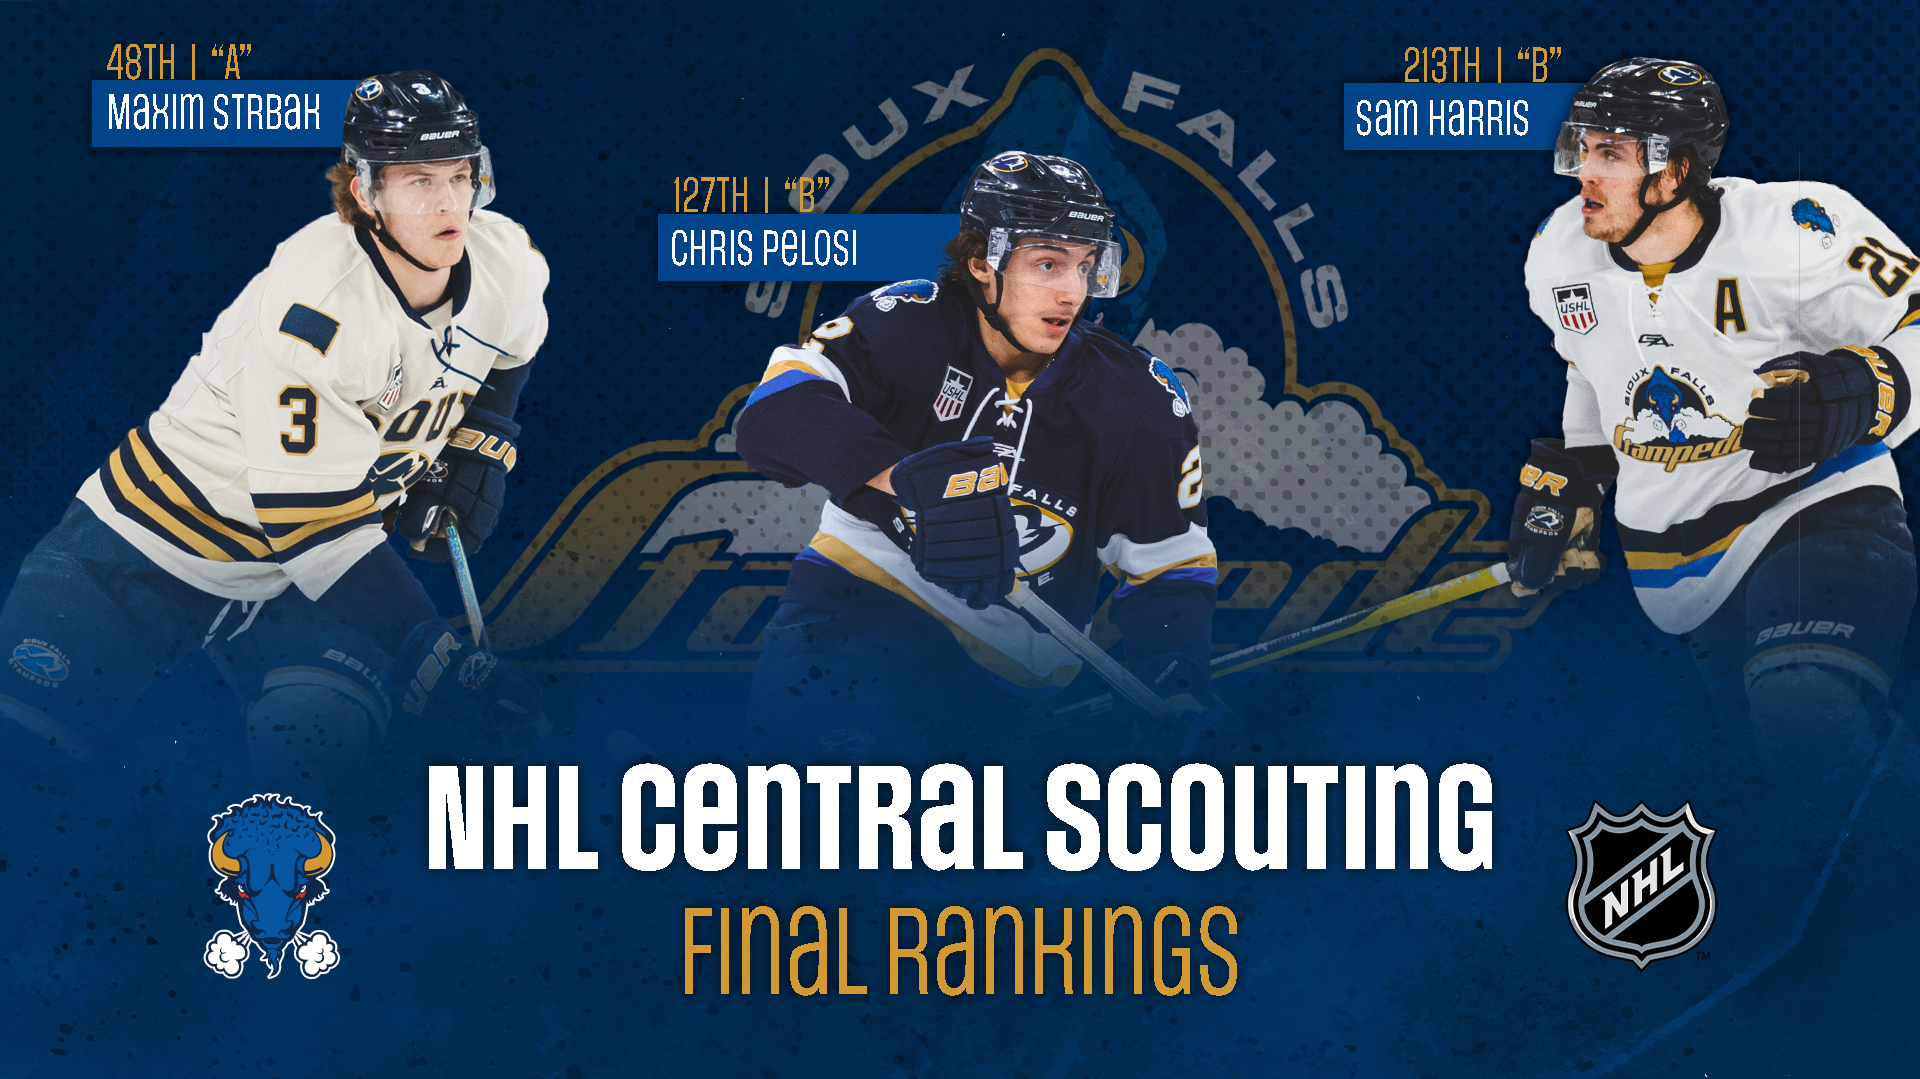 Nhl Central Scouting Releases Final Rankings Includes Three